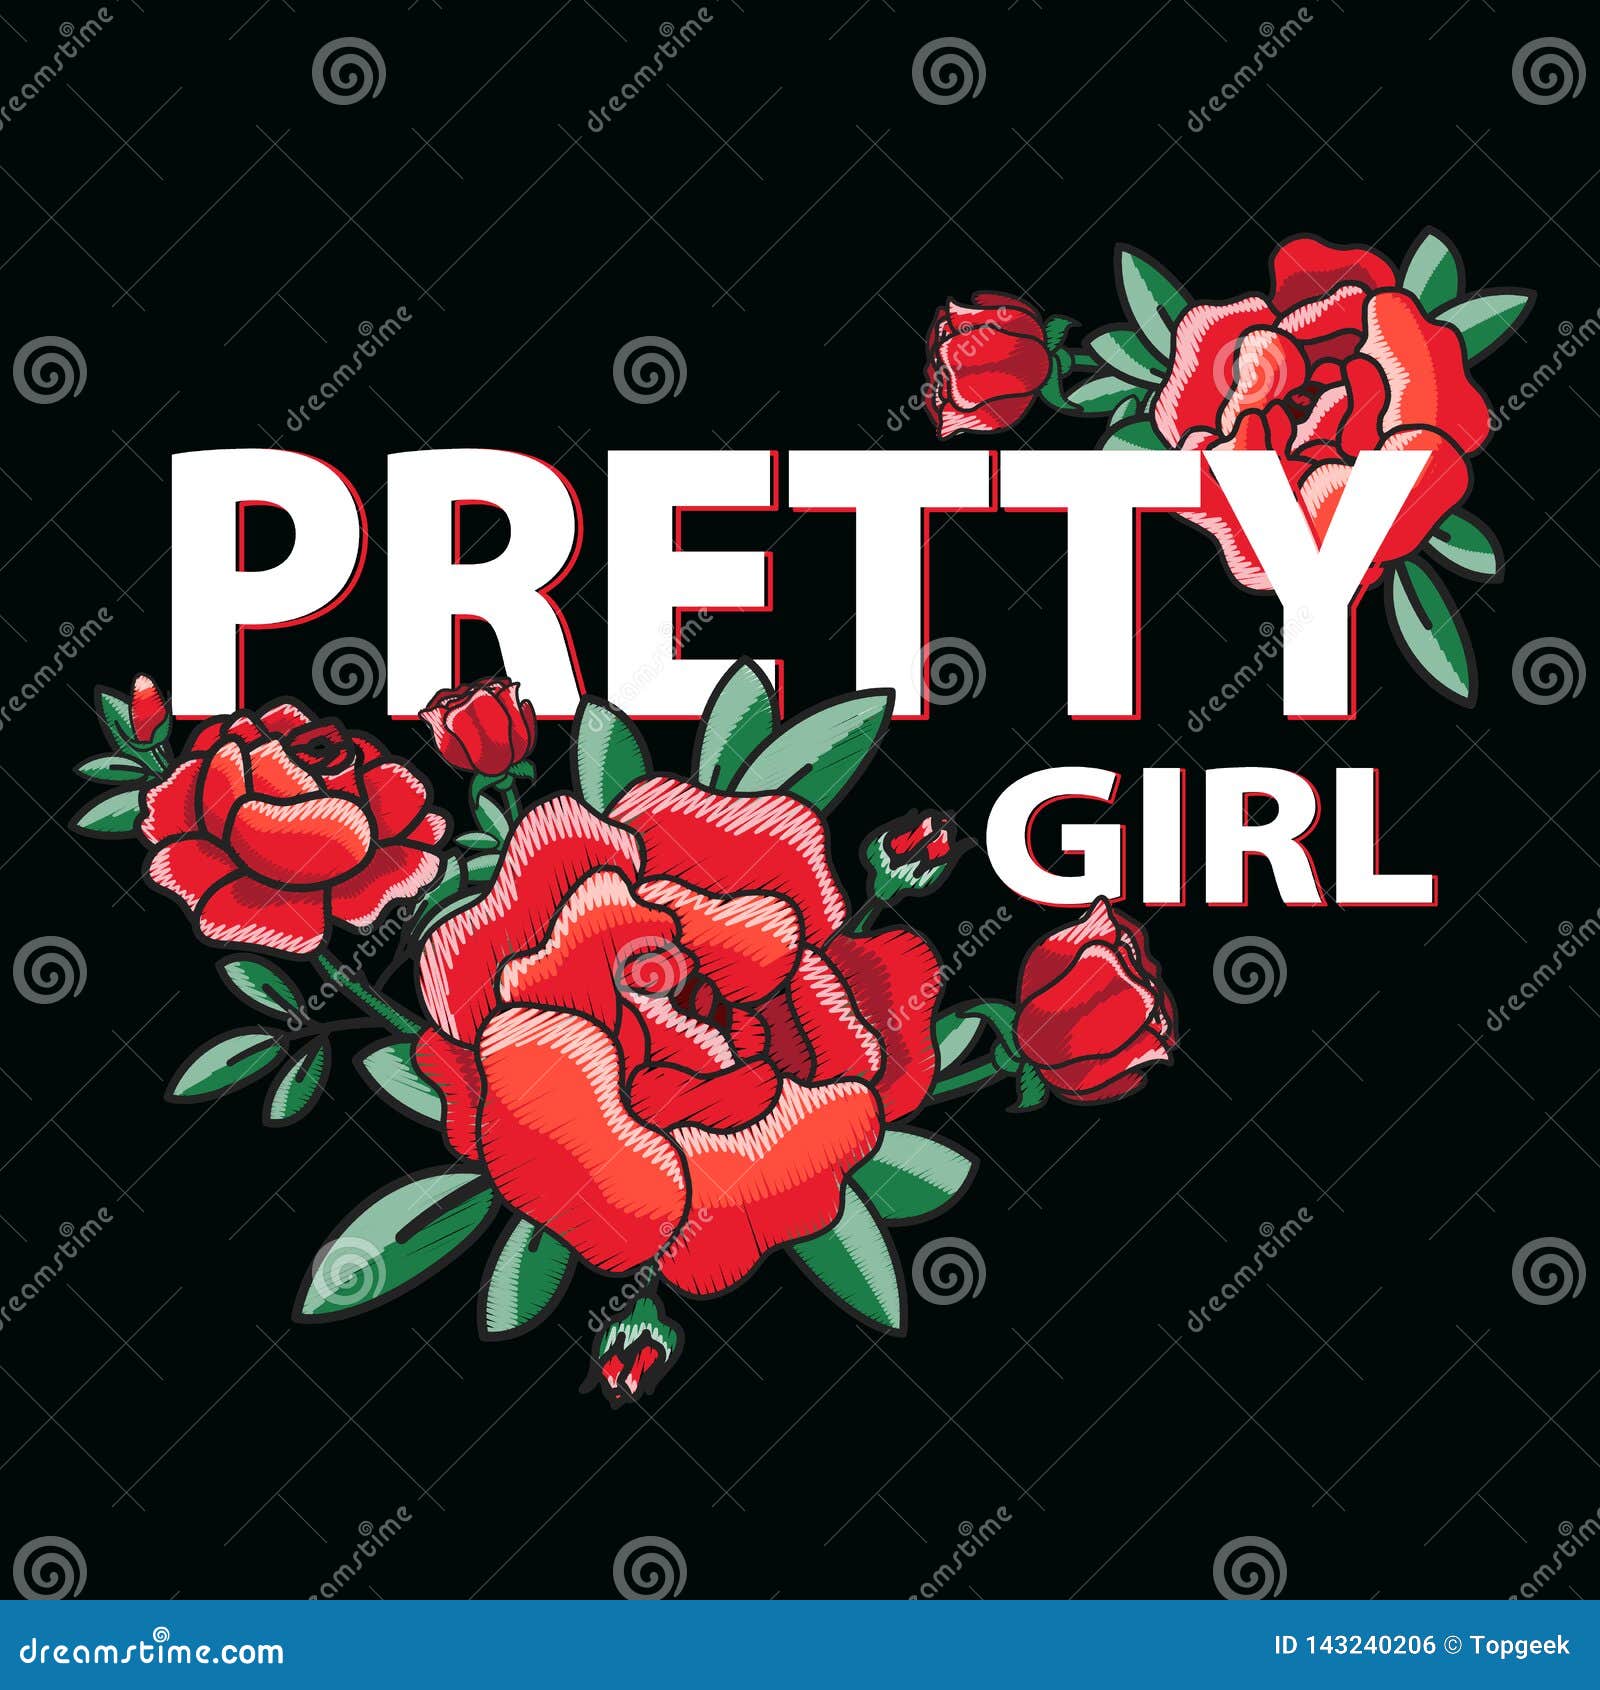 Pretty Girl Poster with Roses Vector Illustration Stock Vector ...